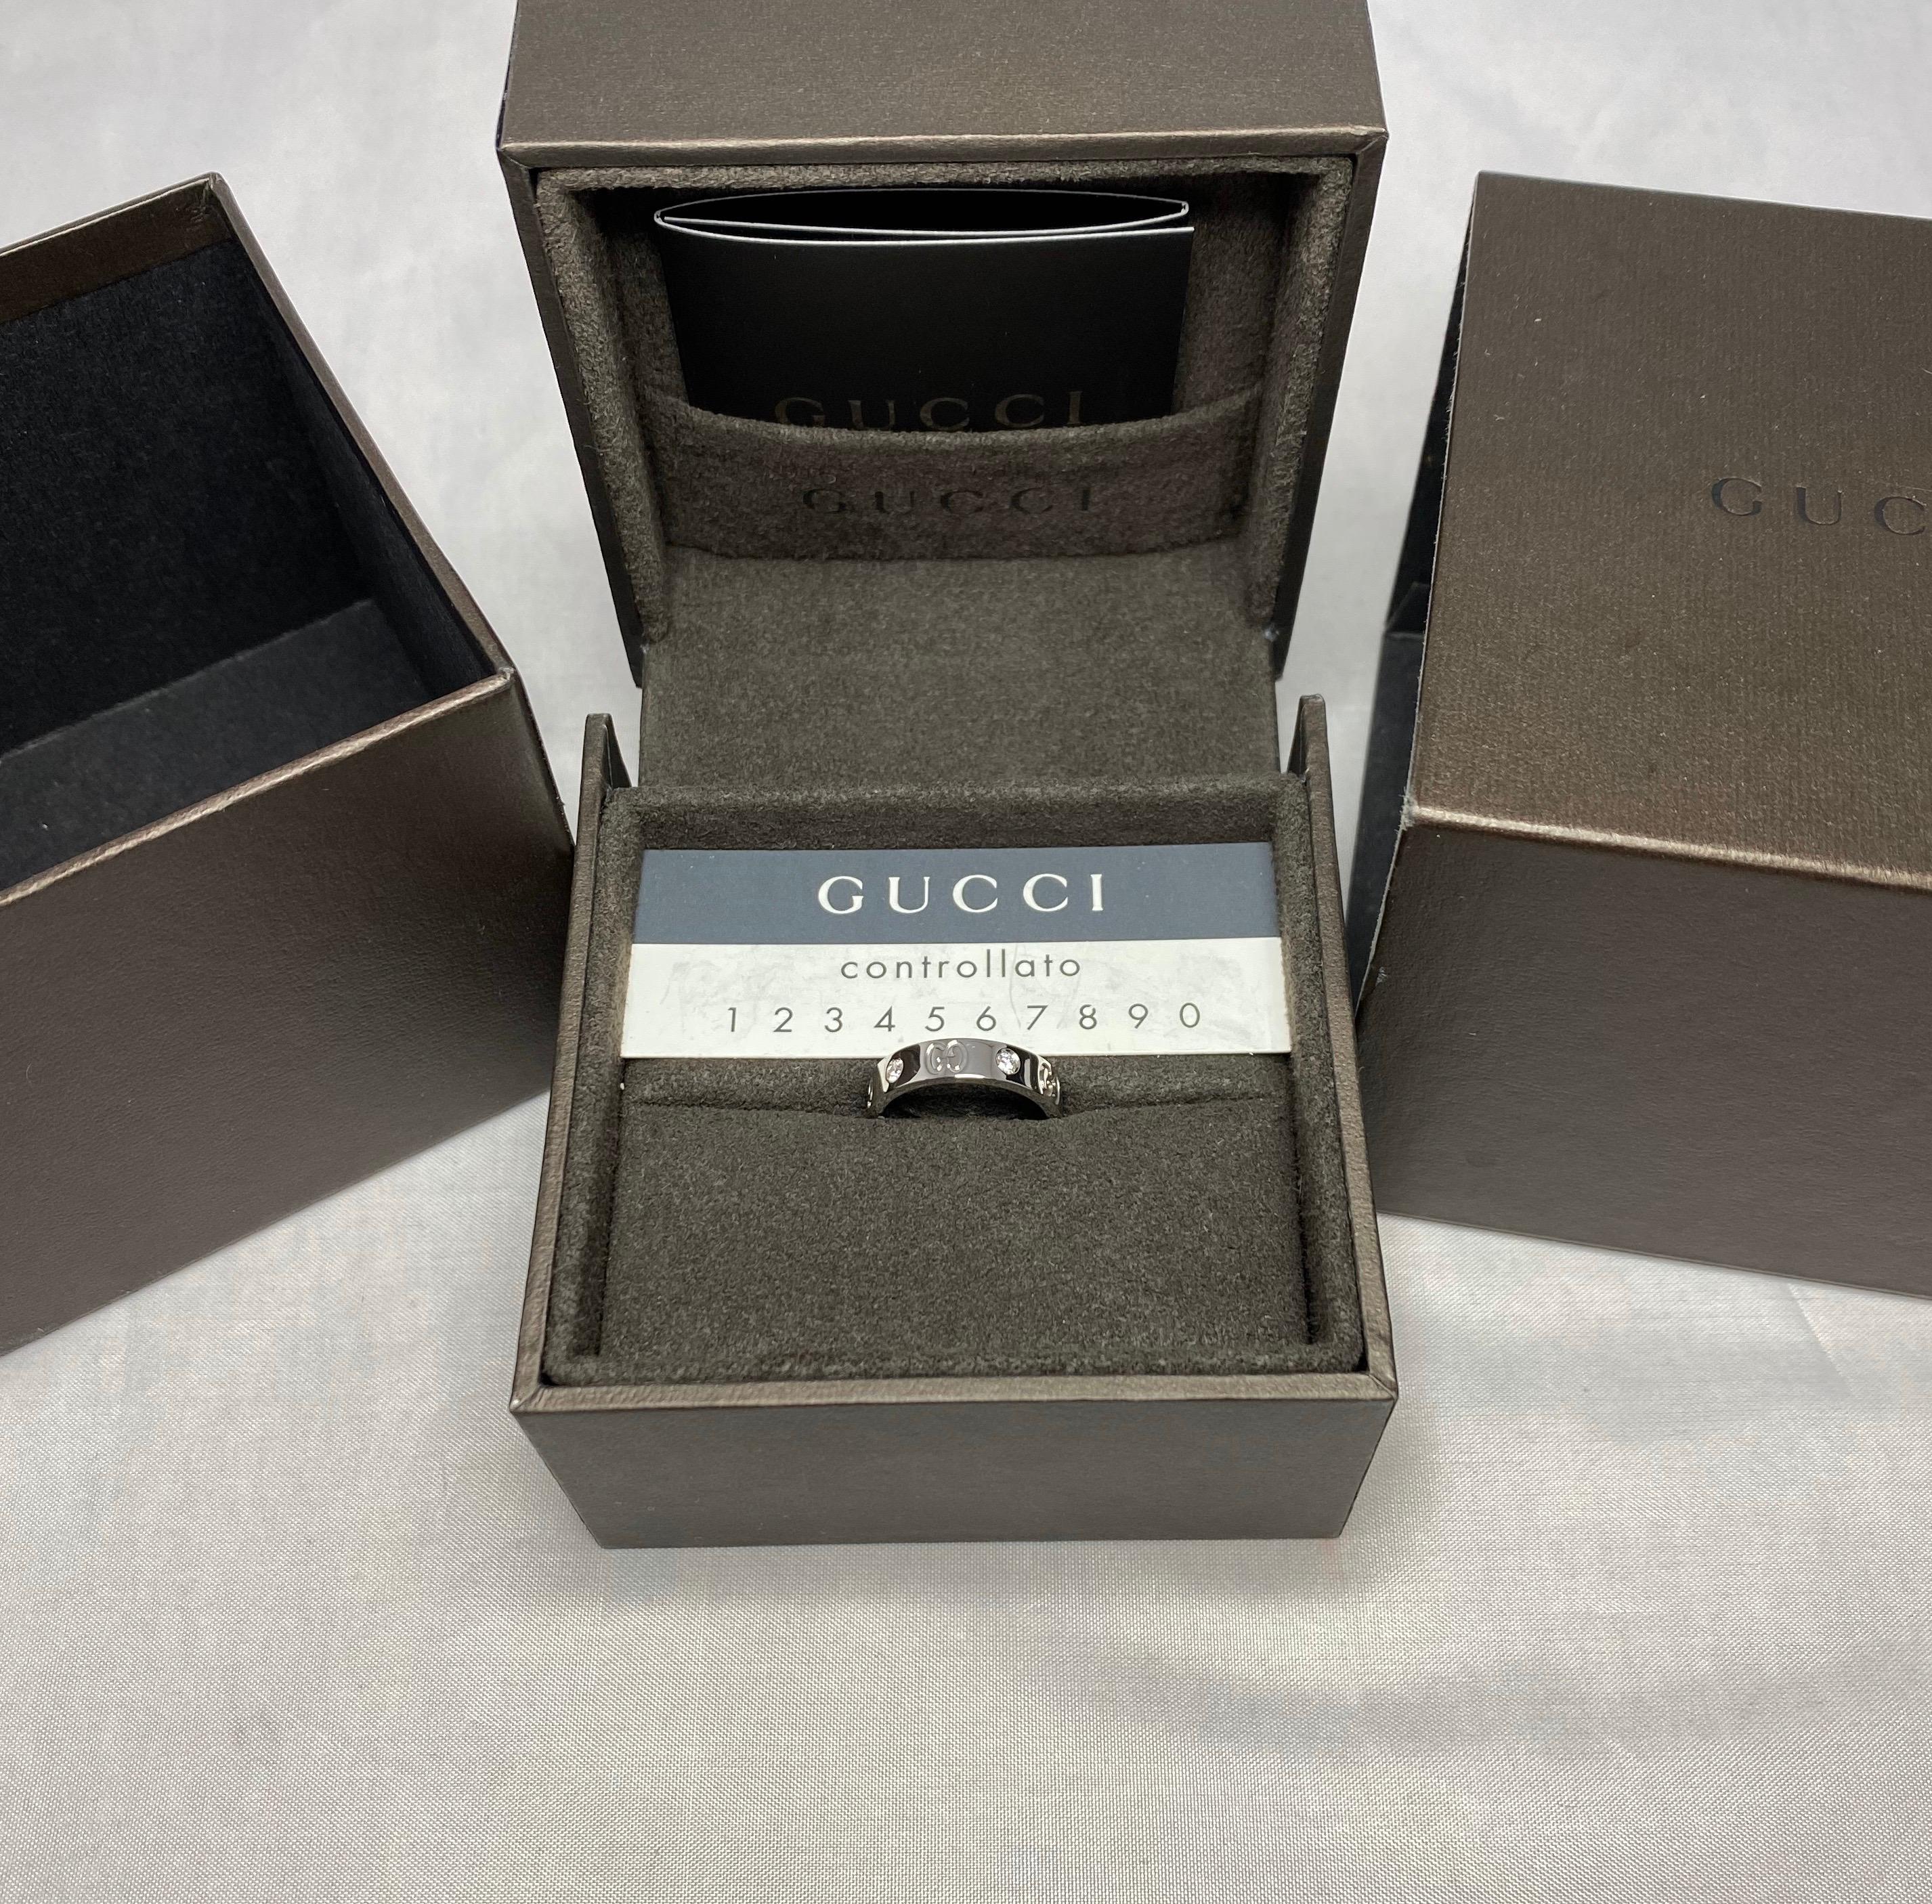 Gucci Icon diamond ring in white gold. Comes with original Gucci box and papers.

Used item, some minor scratches on it. Has been professionally cleaned, polished and rhodium plated so very bright and shiny. Like new.

Italian hallmarks confirming